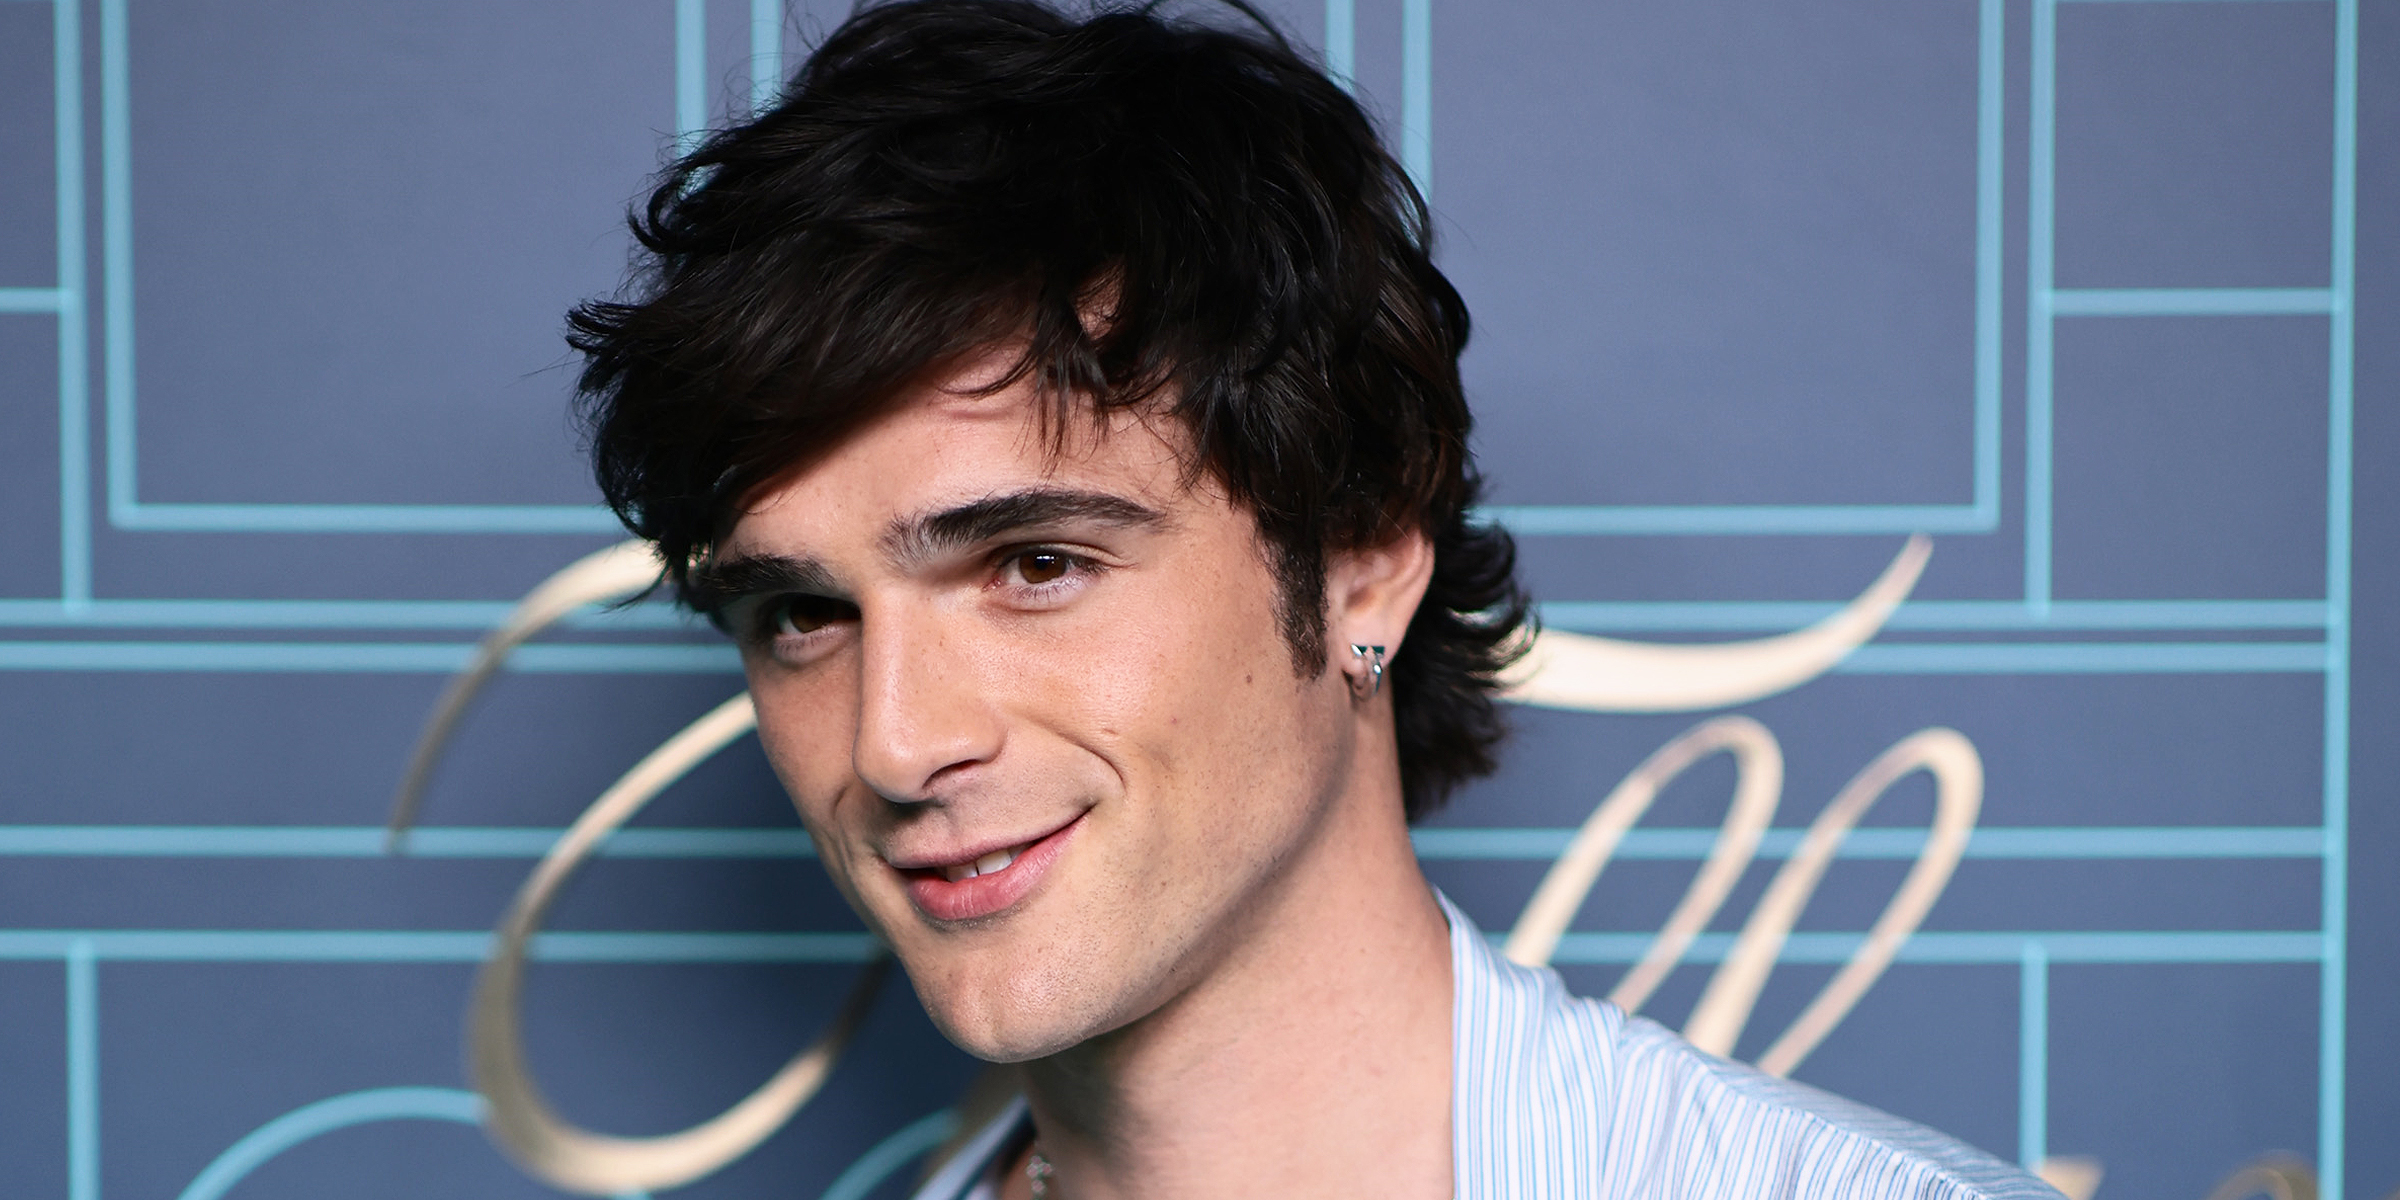 Jacob Elordi | Source: Getty Images